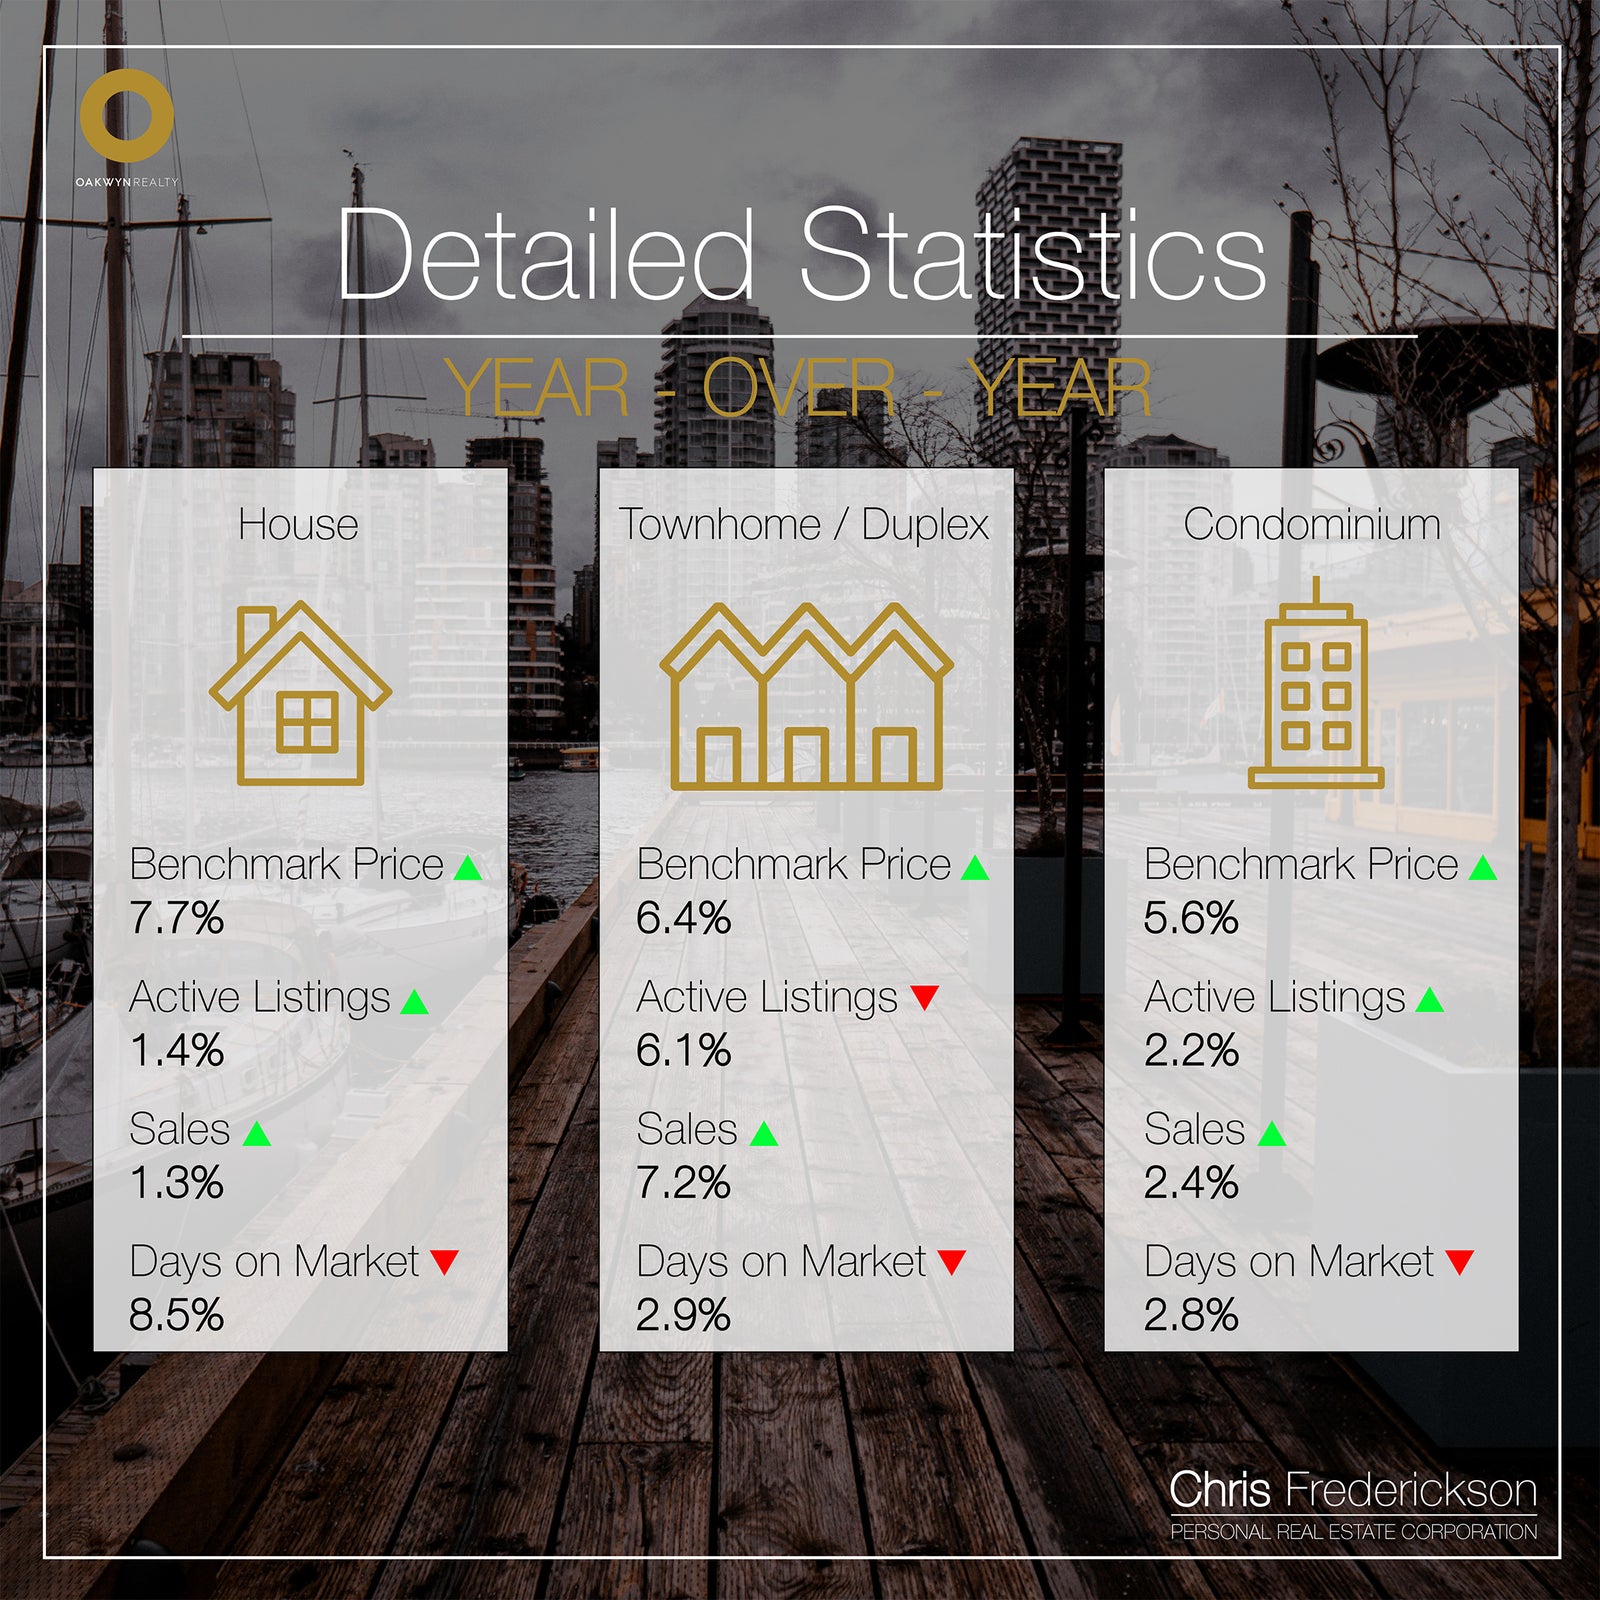 Year-over-Year Market Statistics Vancouver Real Estate Chris Frederickson